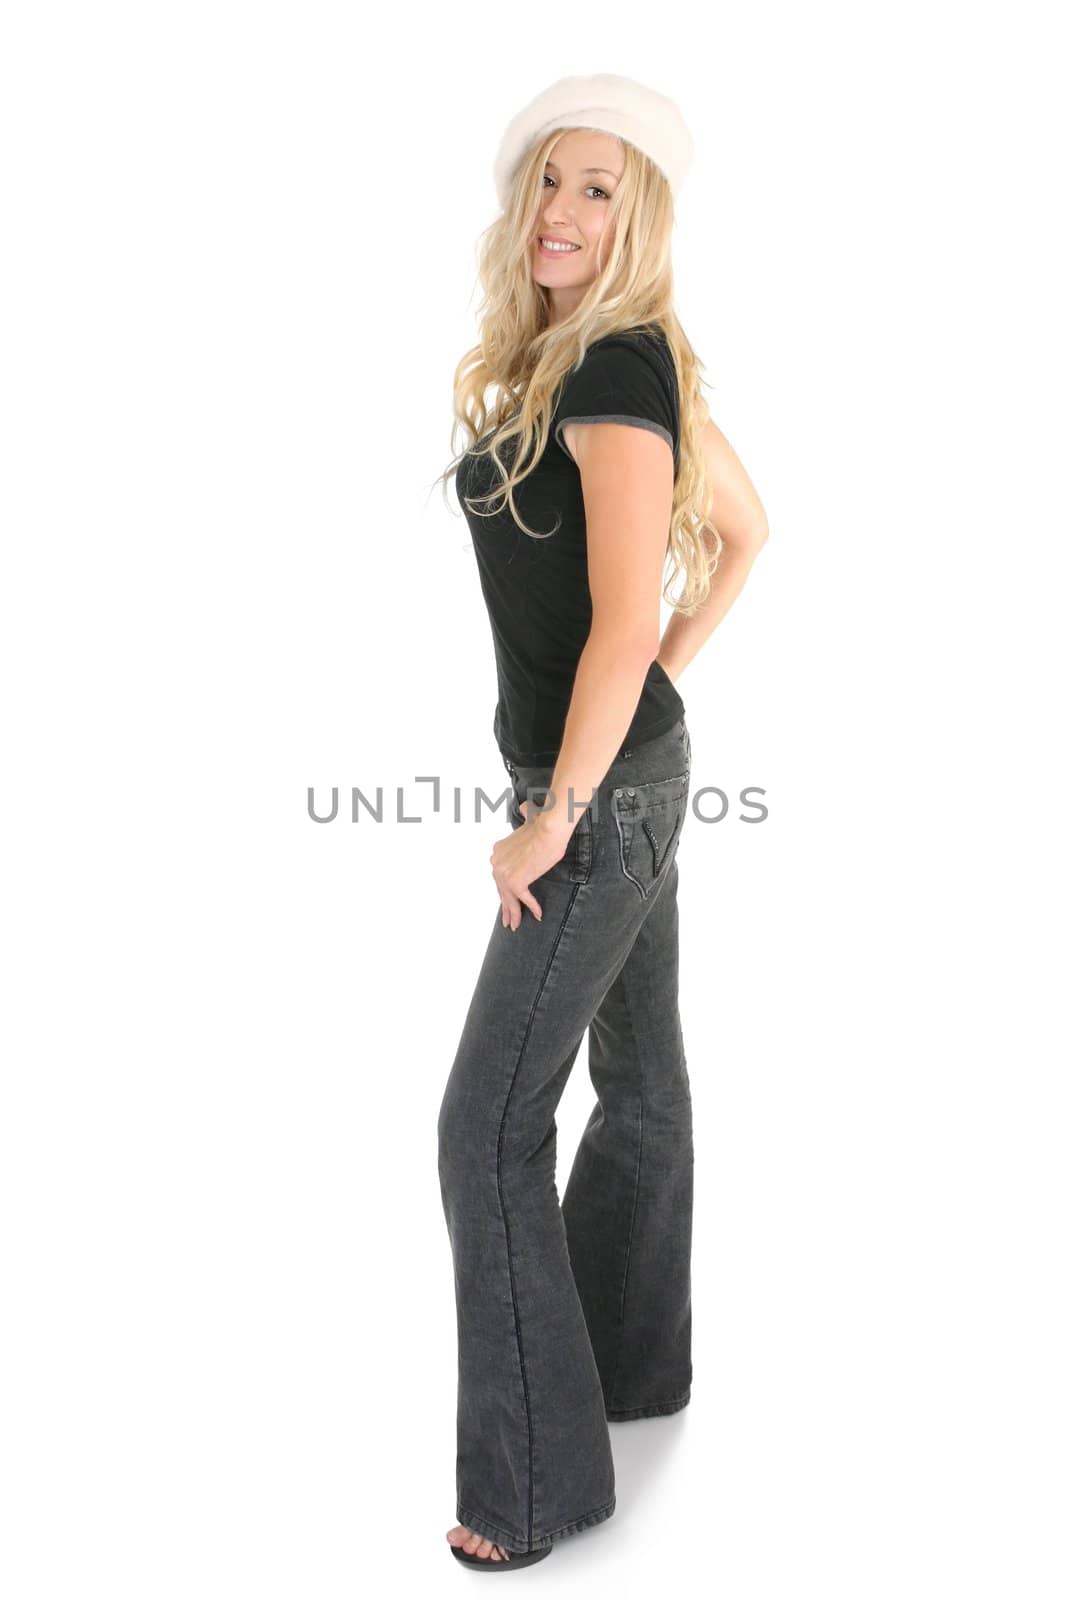 Casual blonde female dressed in charcoal bootleg jeans with leather trim on side seams and pocket with a casual t-shirt, standing in high heels and smiling in a friendly manner.